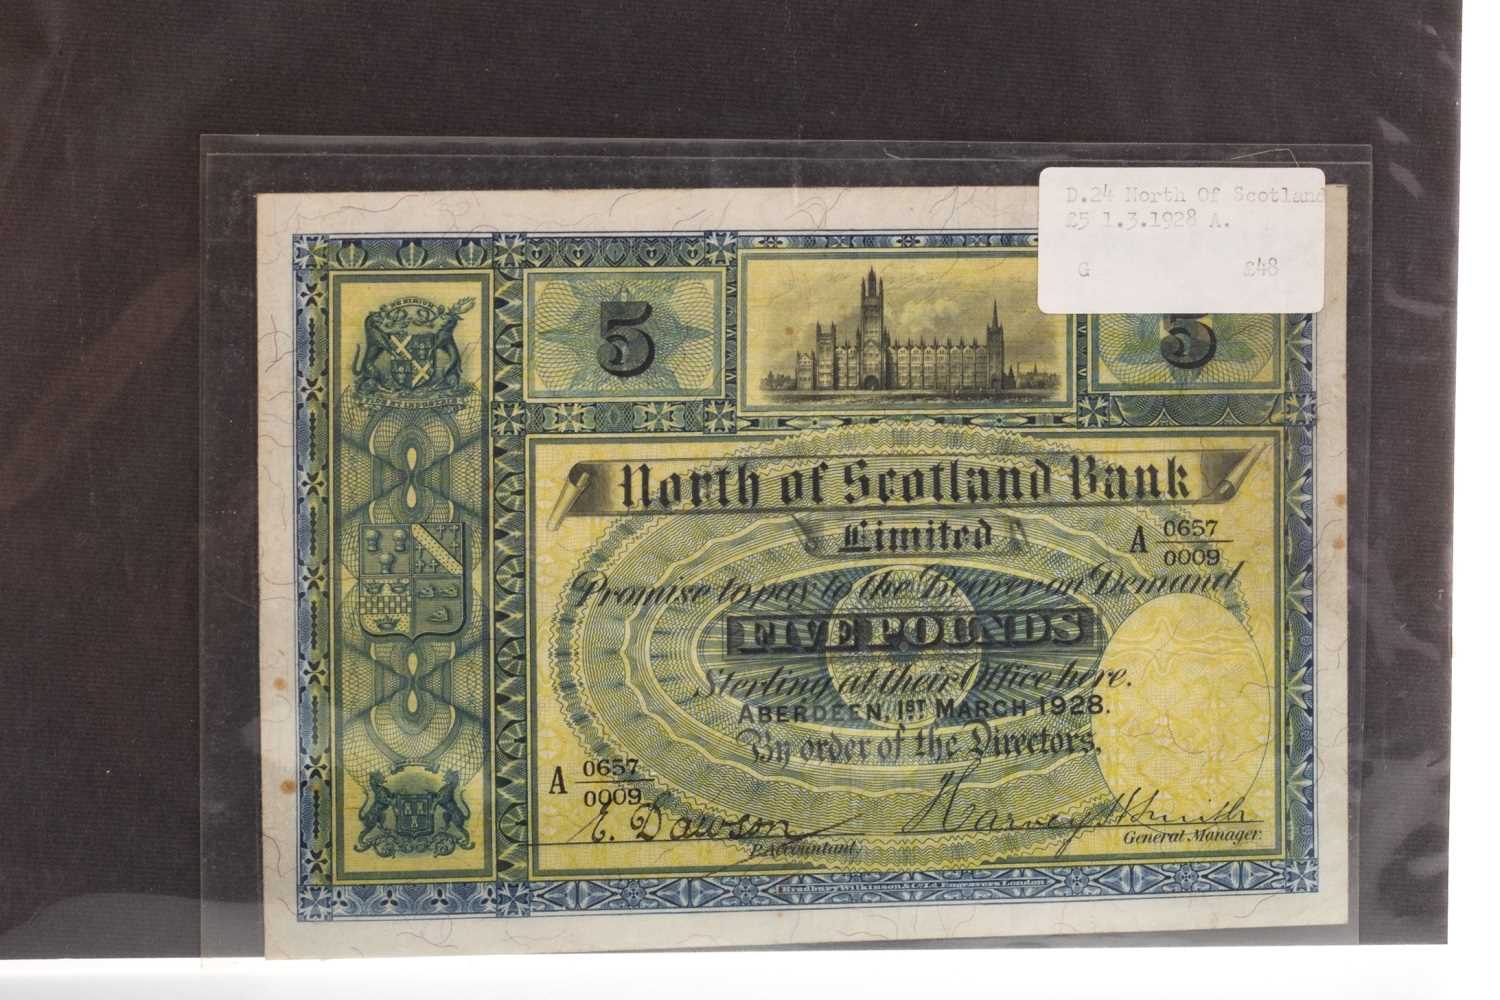 Lot 614 - THE NORTH OF SCOTLAND BANK LIMITED £5 NOTE 1928